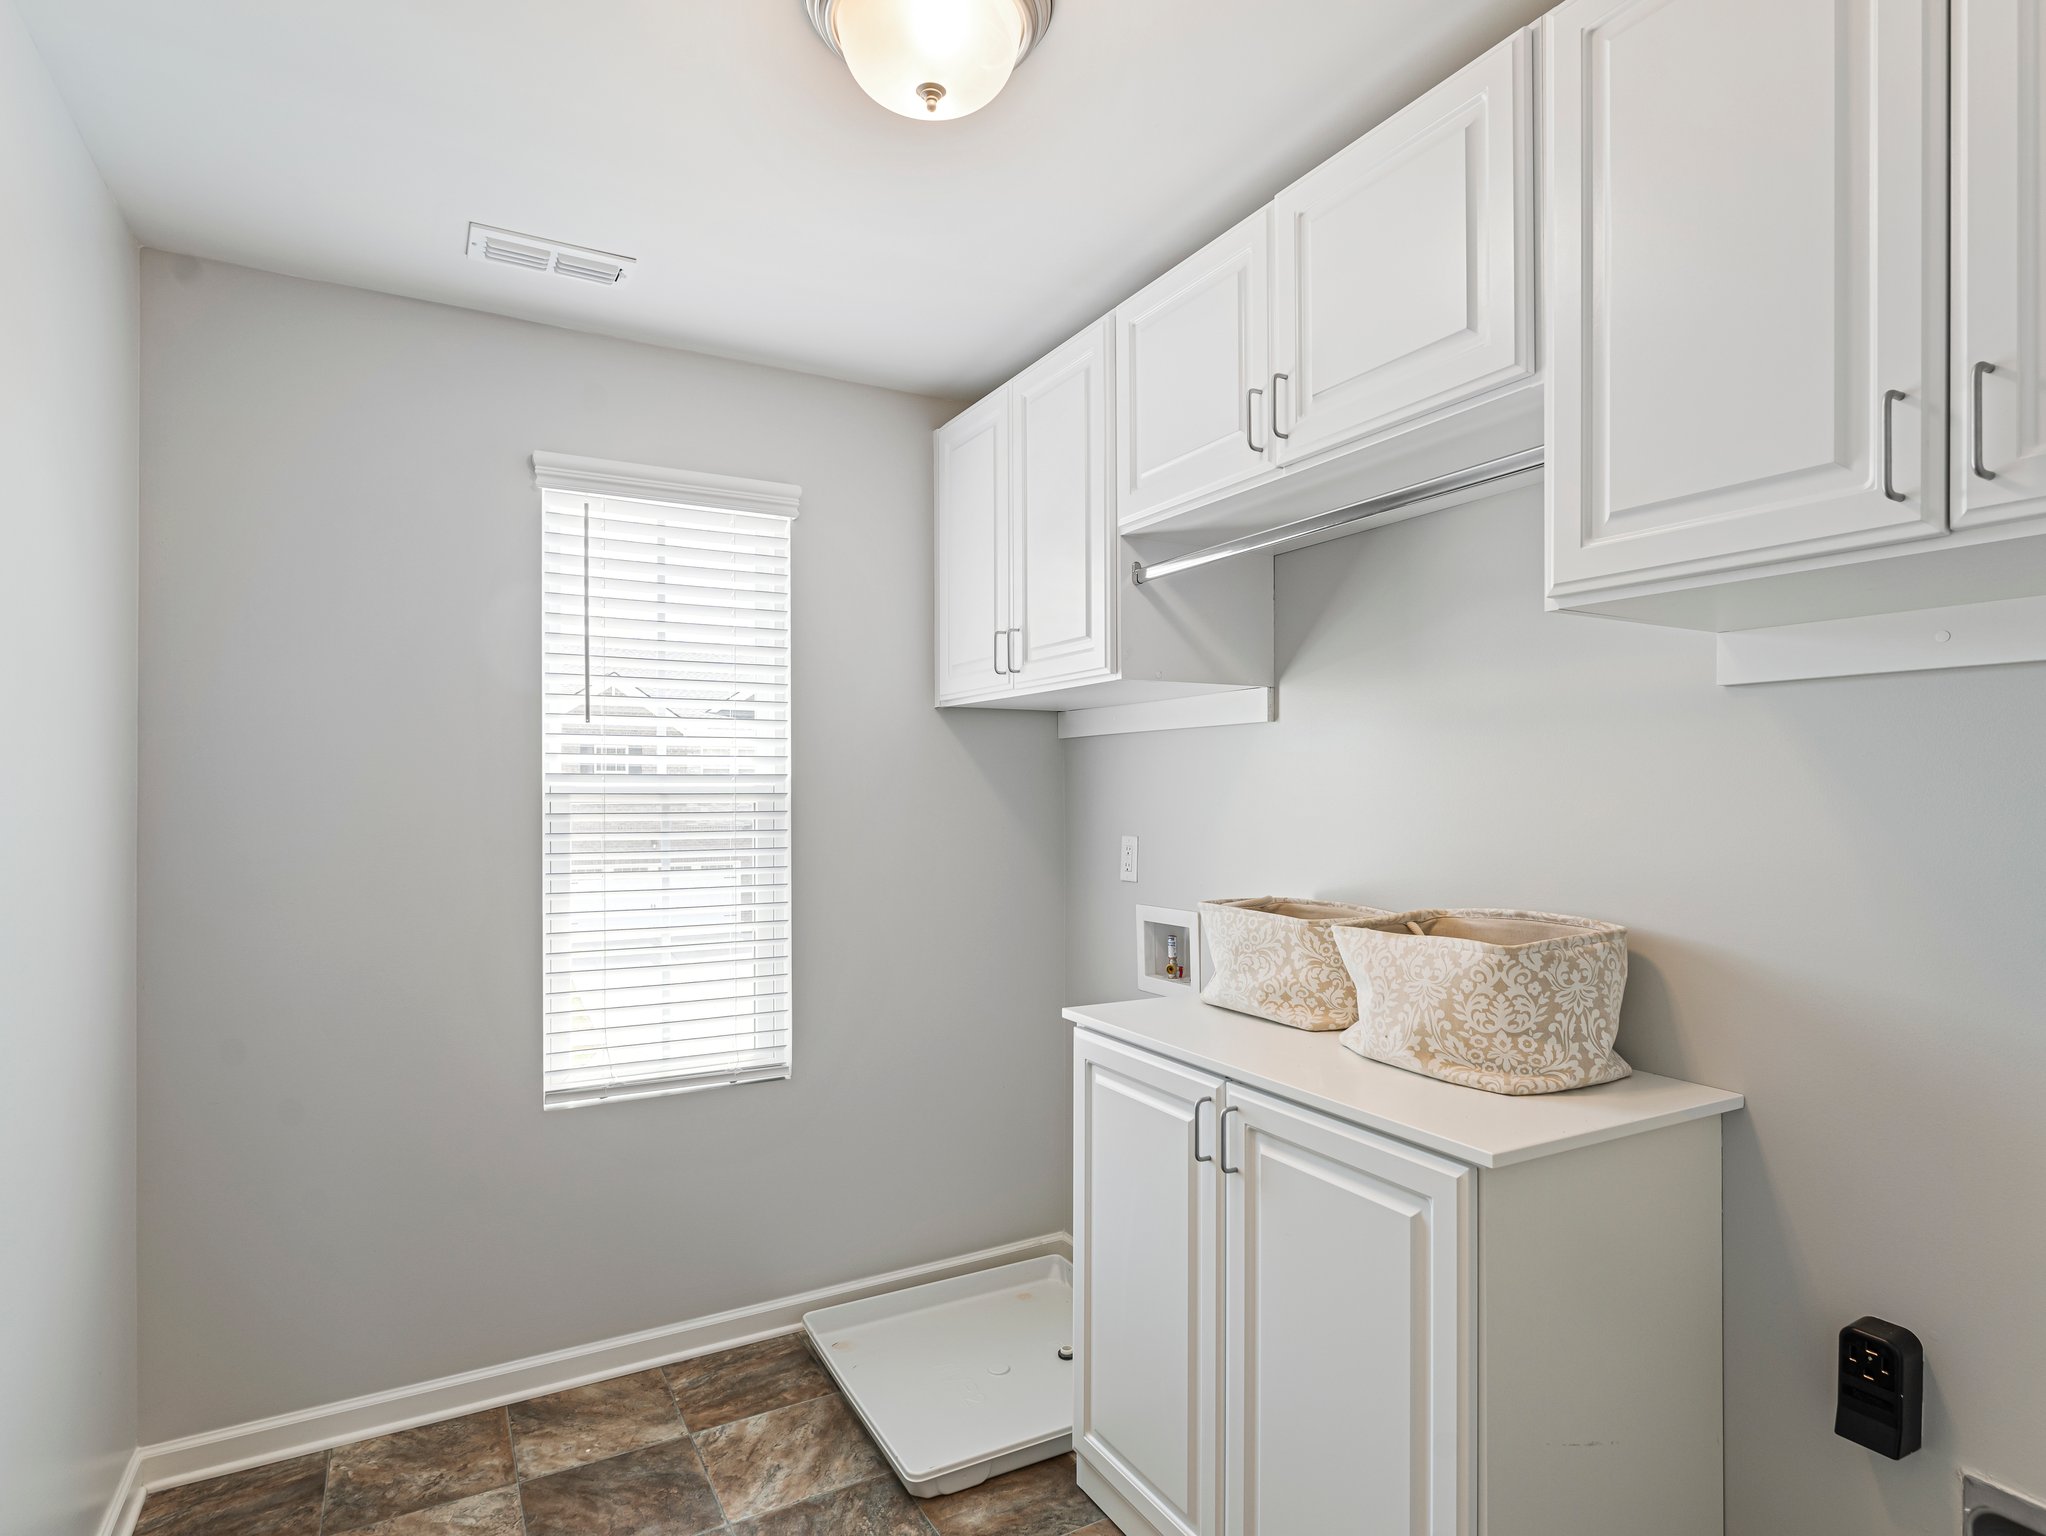 Large upstairs laundry room with custom cabinetry and a window overlooking the front yard